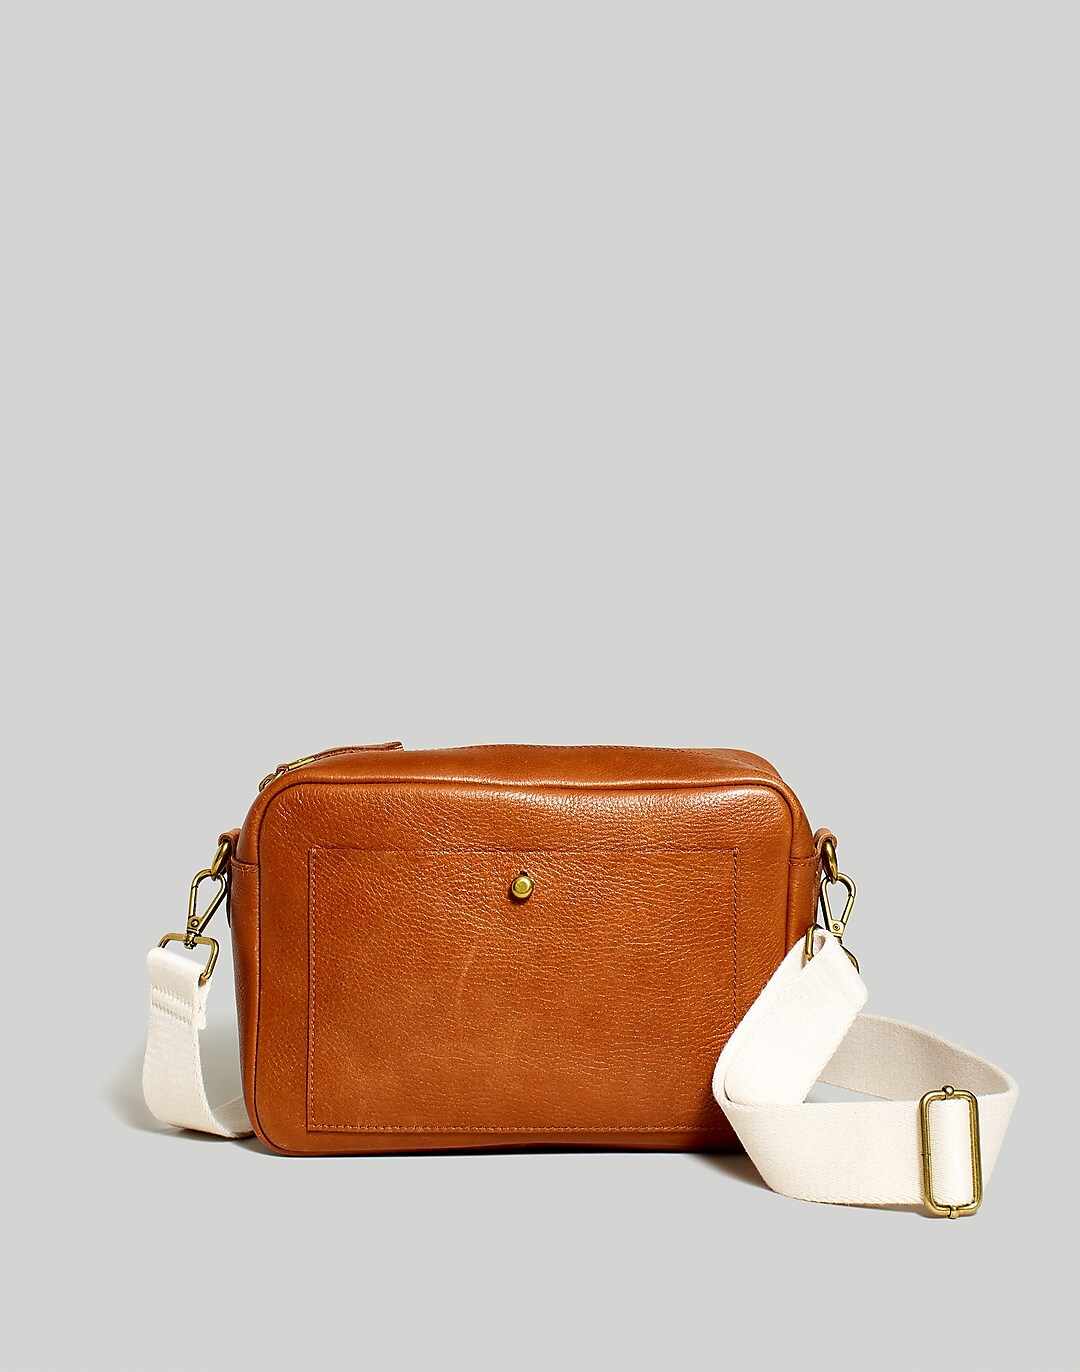 Transport Camera Bag by Madewell for $20